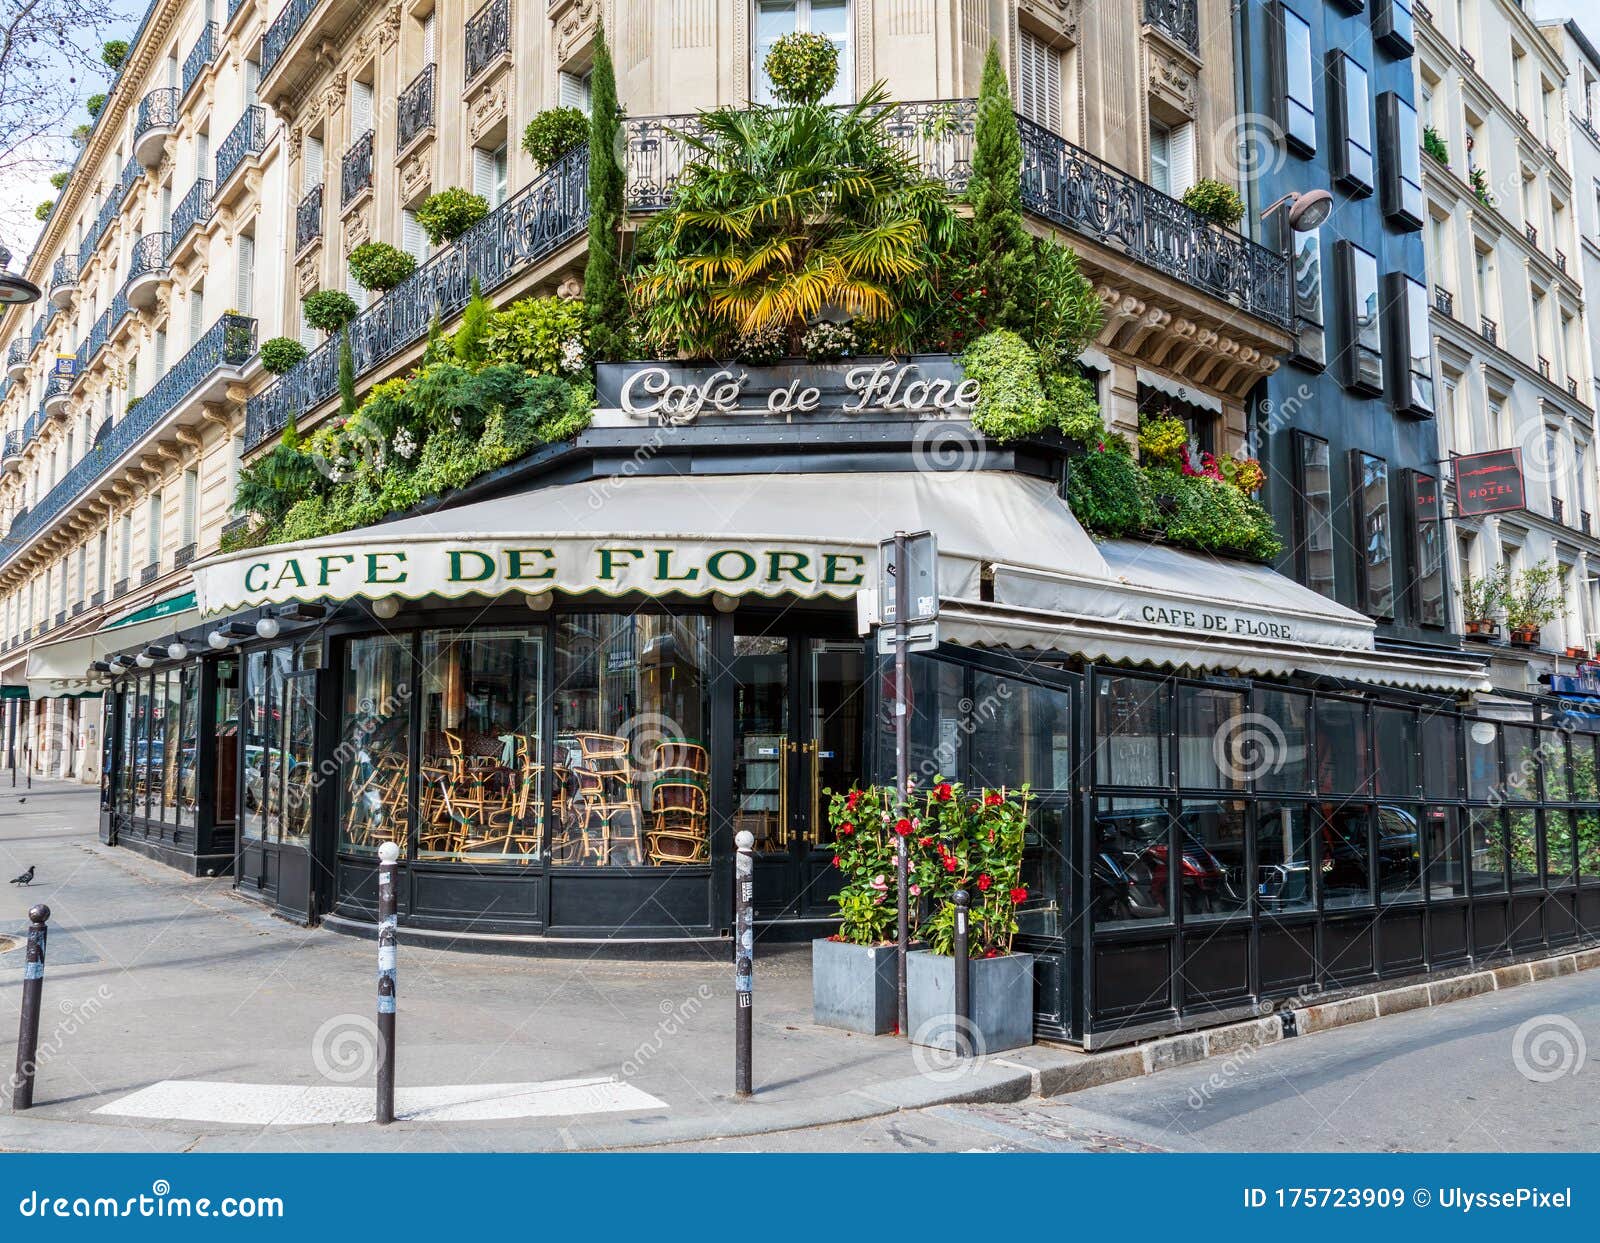 Cafe De Flore Closed because of Coronavirus Pandemic - Paris, France  Editorial Stock Image - Image of pandemic, government: 175723909